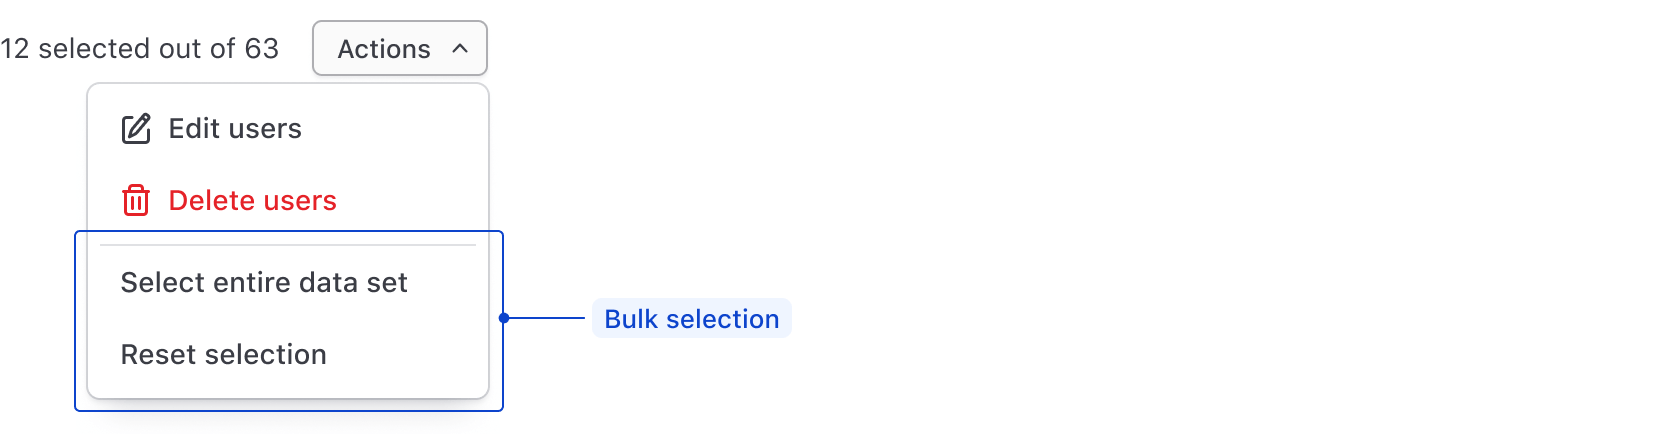 Example of bulk selection